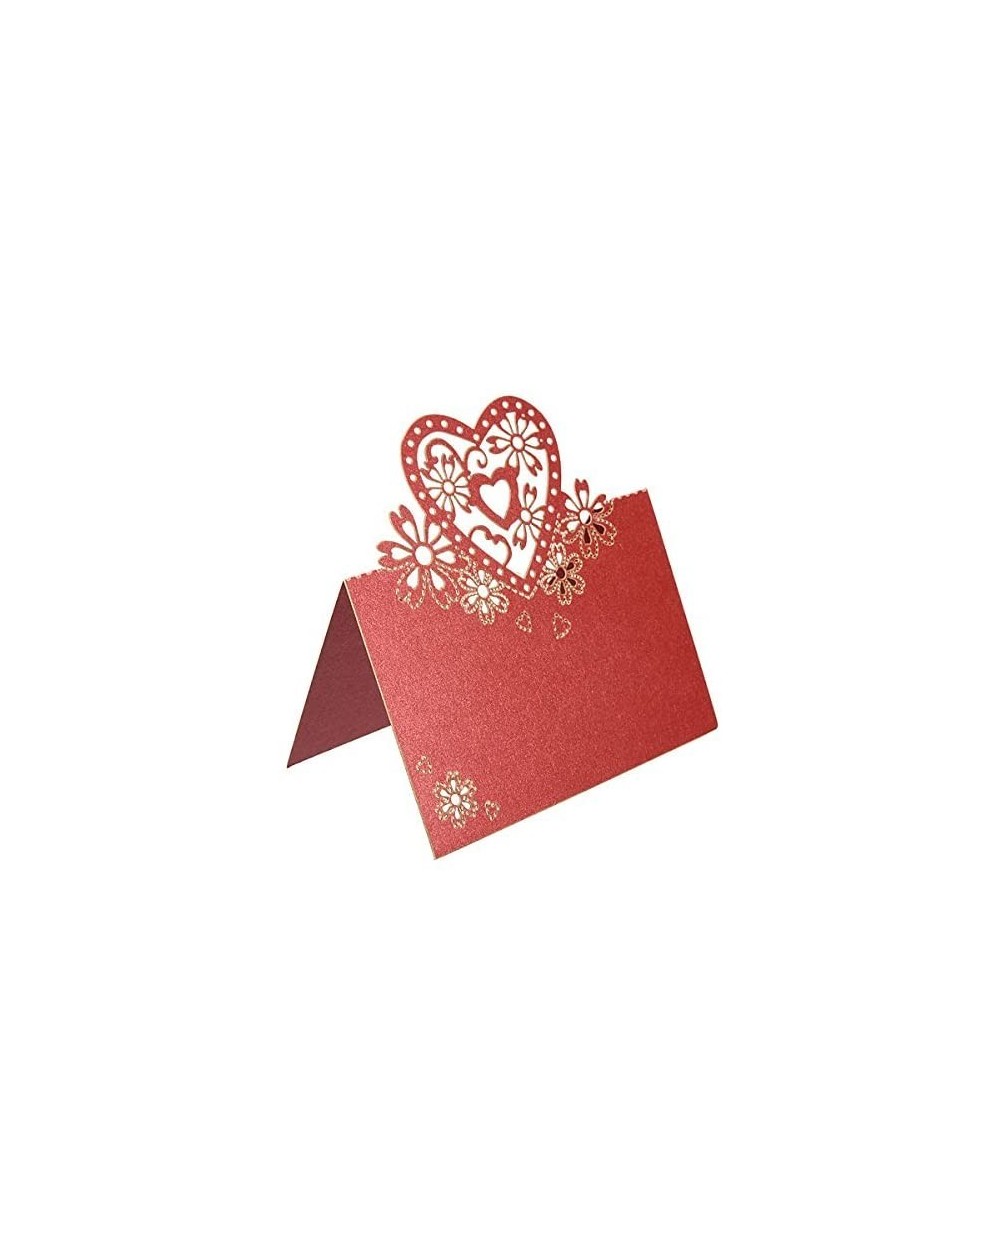 Place Cards & Place Card Holders 50pcs Wedding Party Table Name Place Cards Favor Decor Love Heart Laser Cut Design (Red) - R...